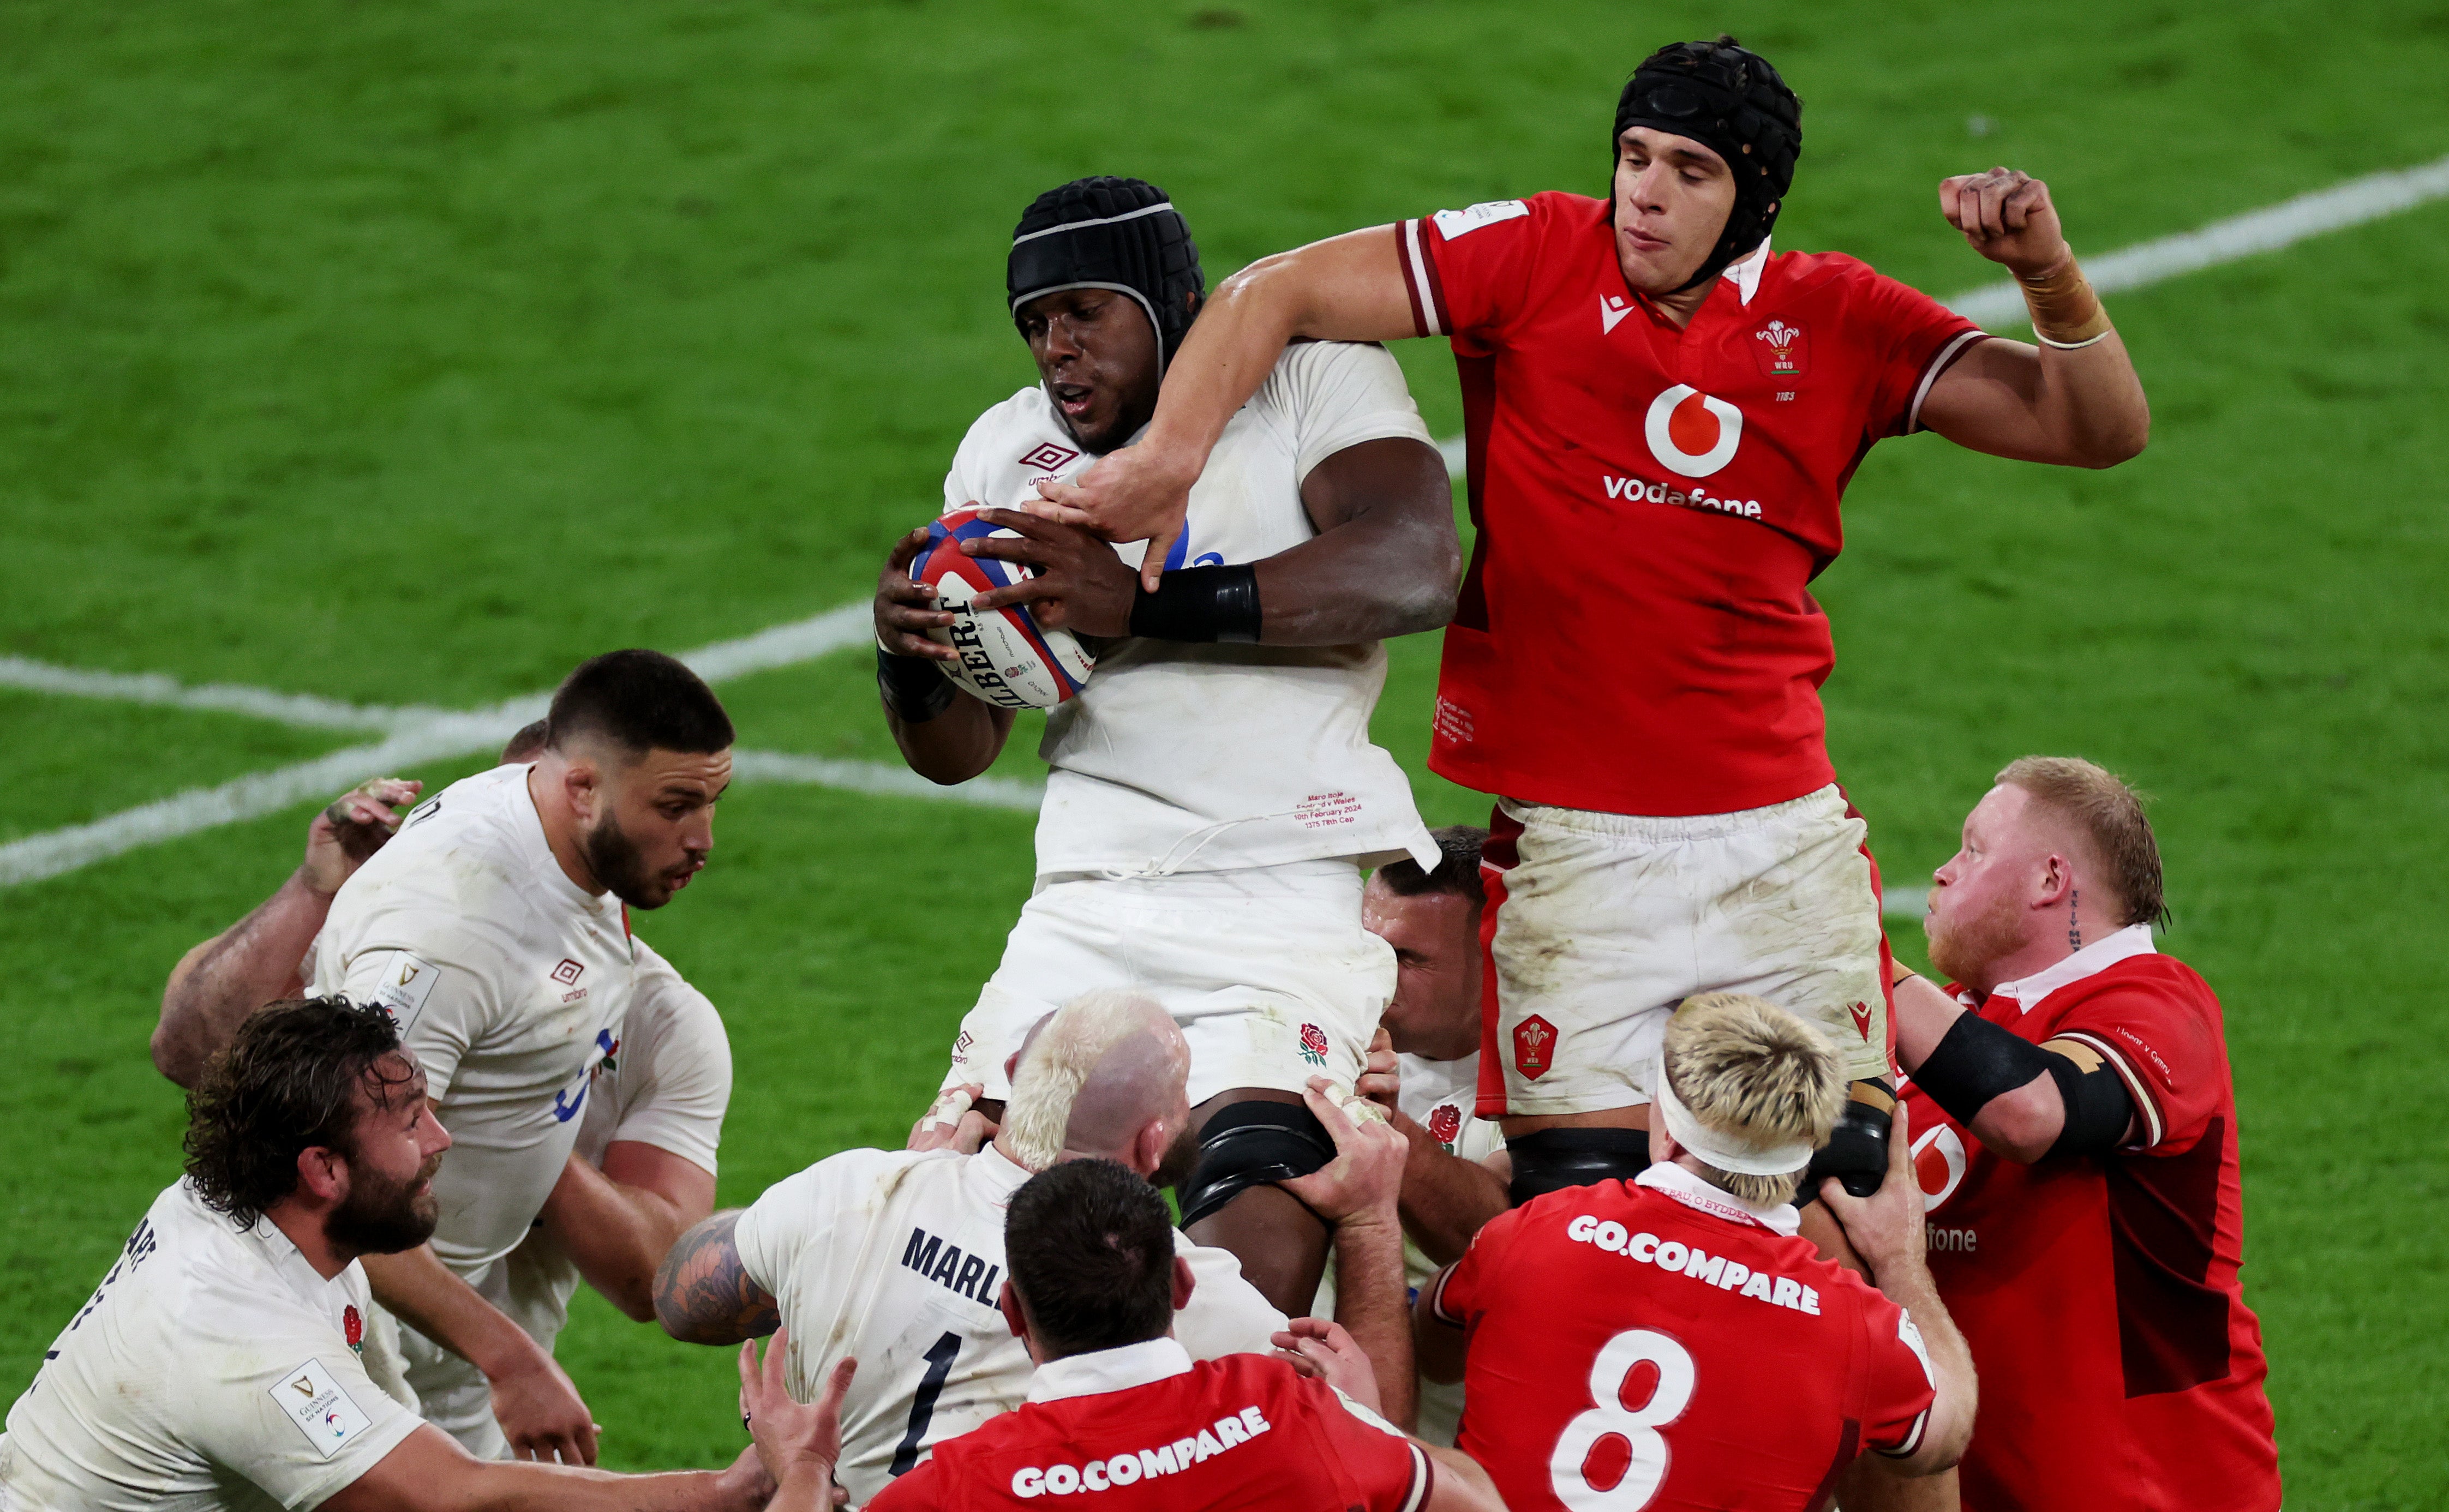 Maro Itoje impressed for England as they got the better of Wales